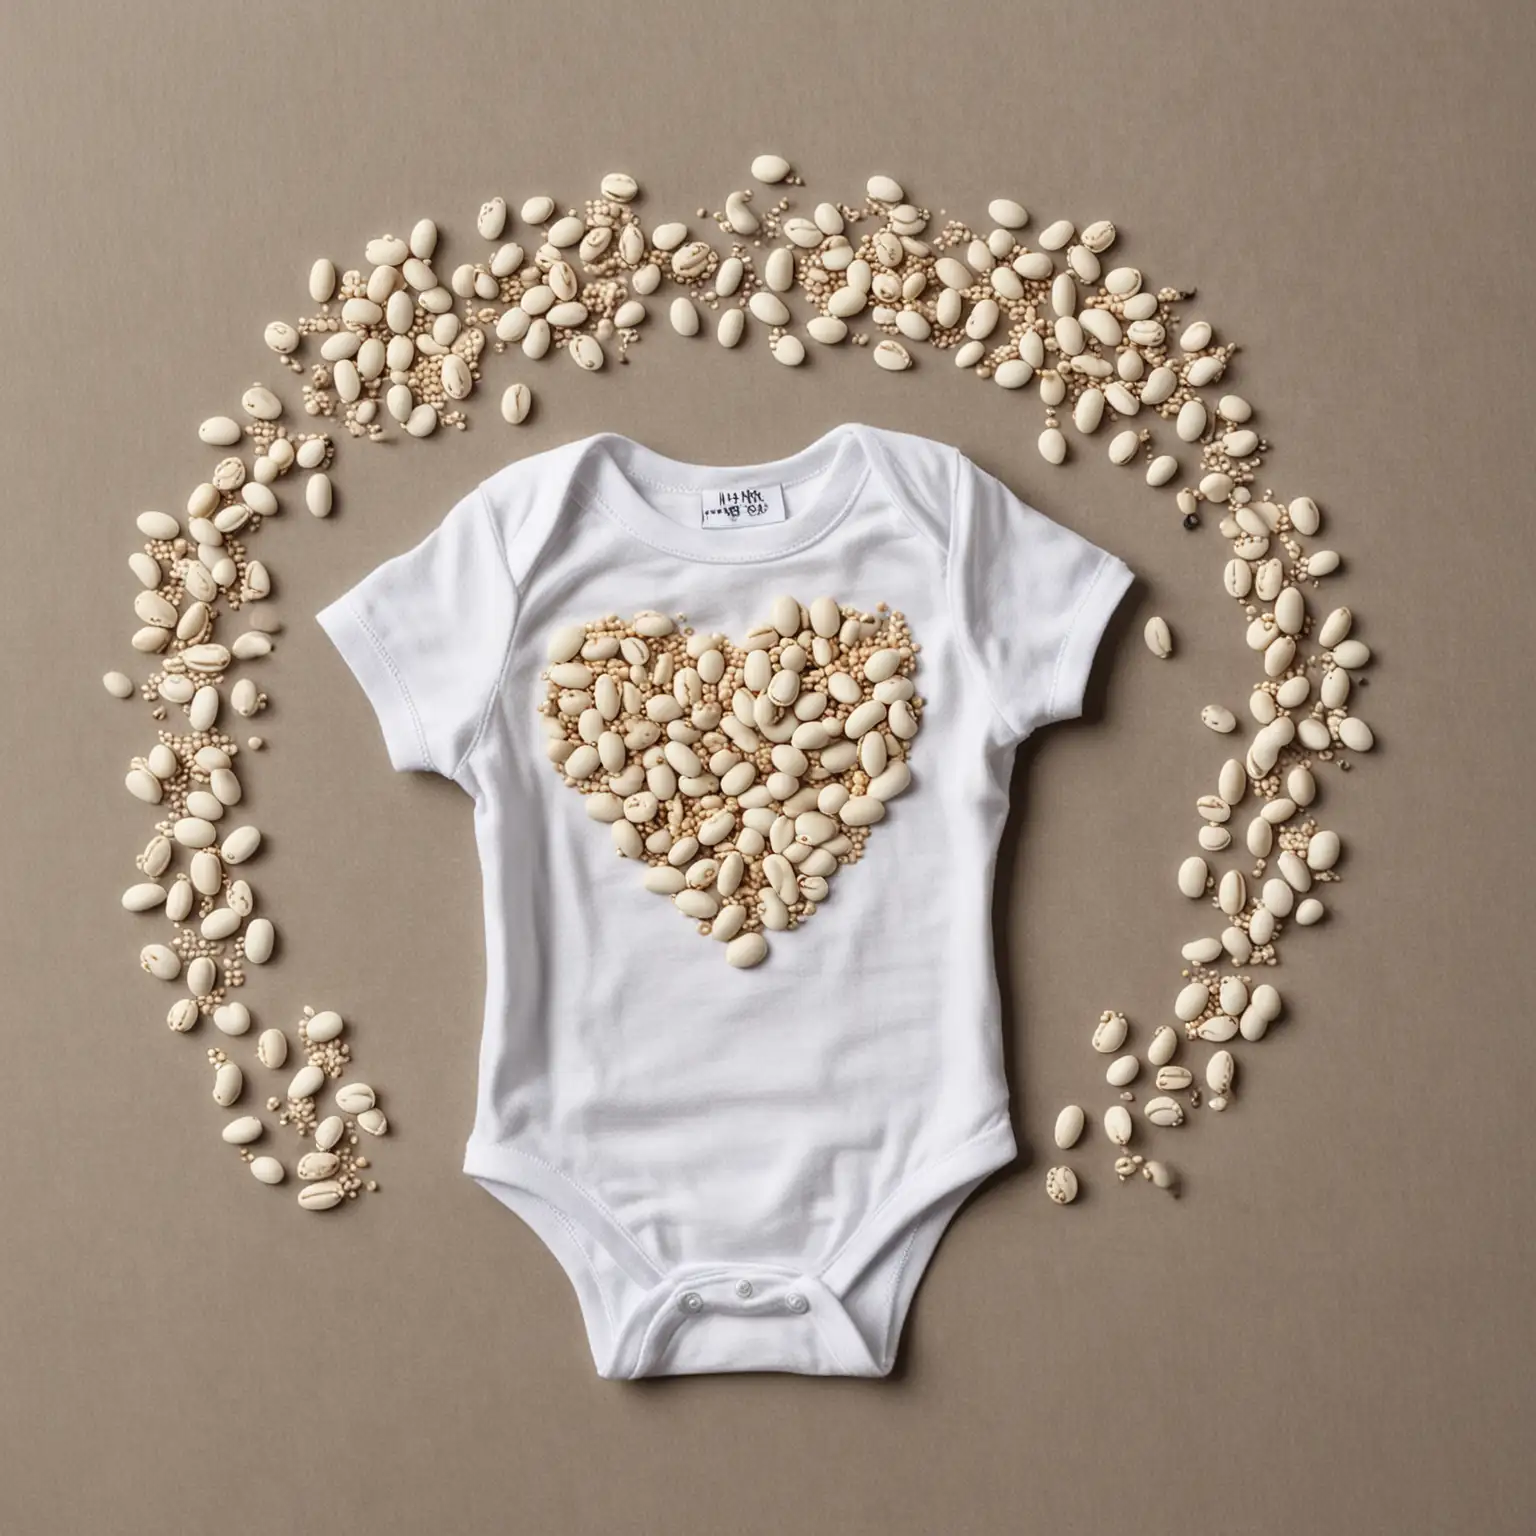 White Baby Onesie with HeartShaped Beans Cute and Whimsical Baby Clothing and Creative Food Art